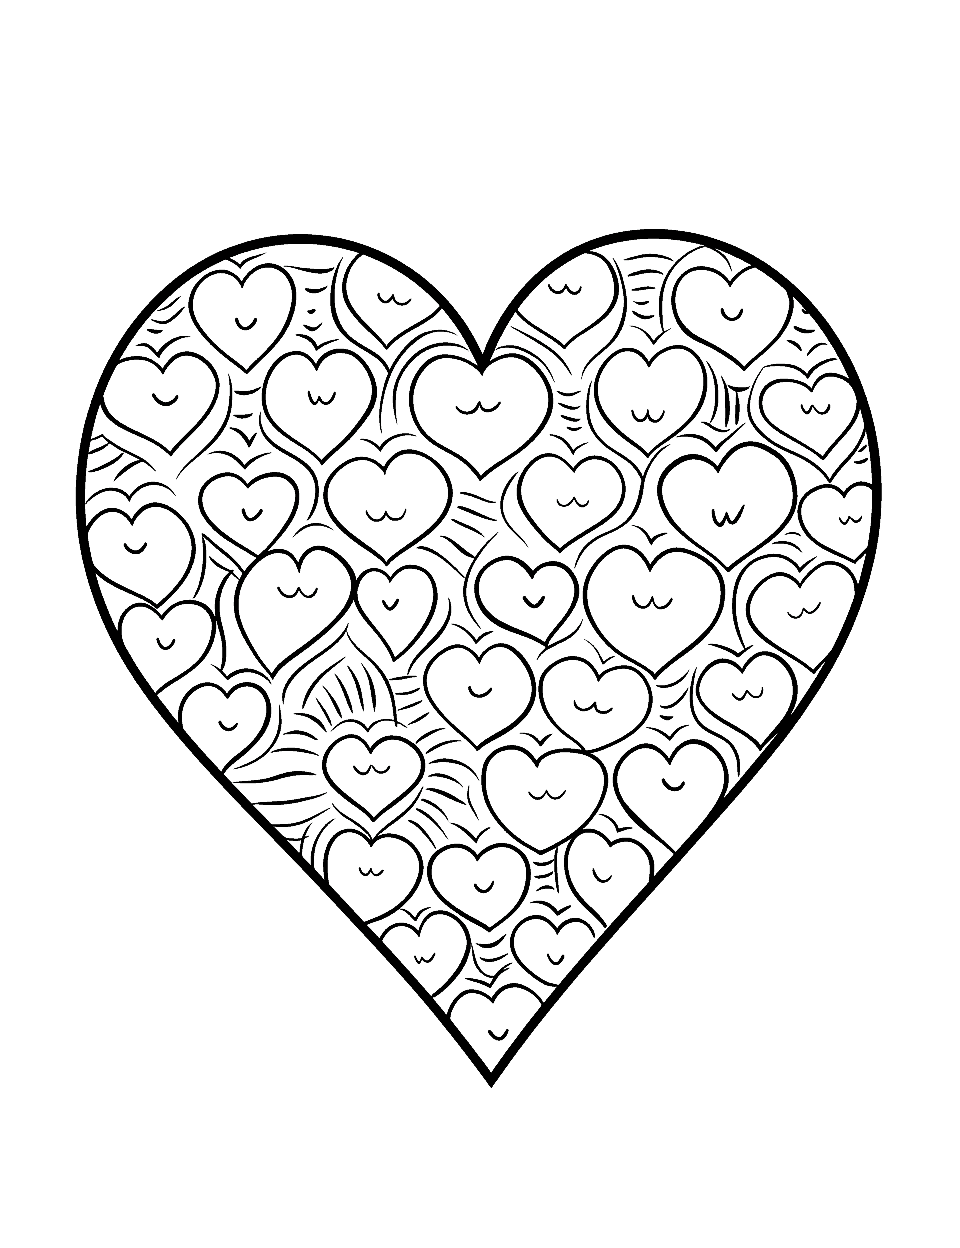 Heart Shape Learning Coloring Page - A page with different shapes, and kids have to color only the heart shapes.